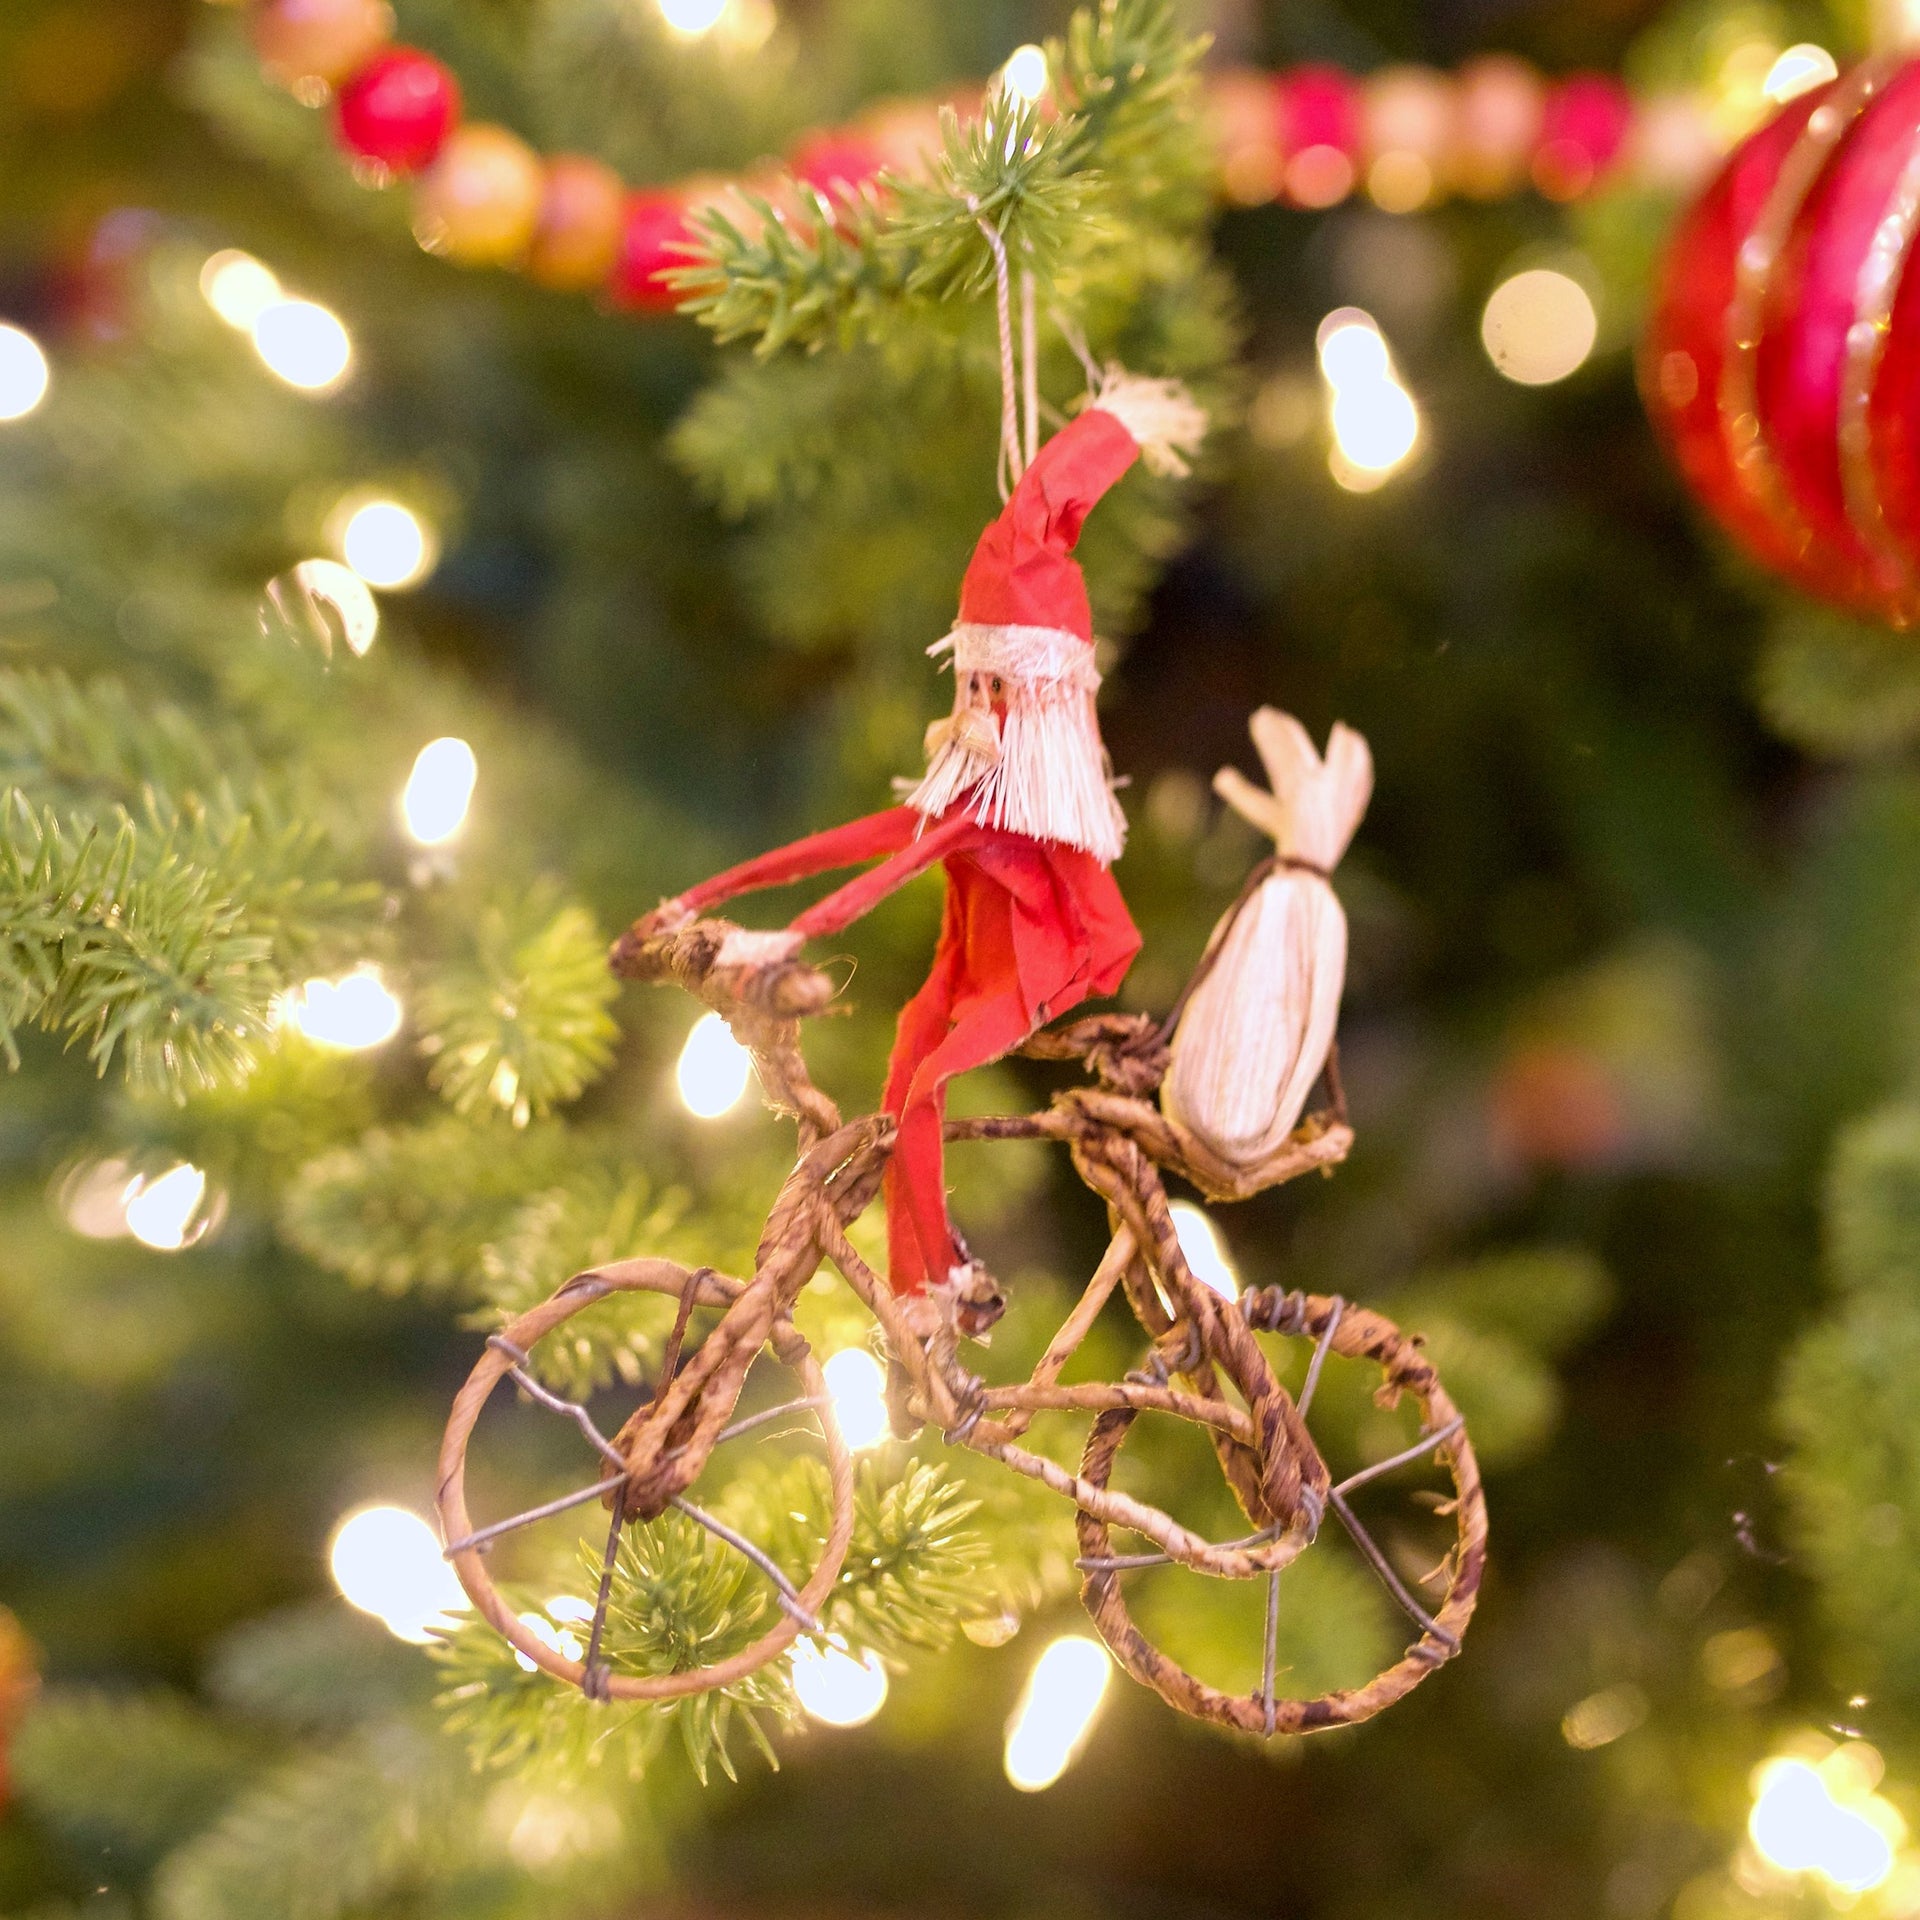 african Santa riding a bicycle ornament hanging on Ornaments 4 Orphans Christmas tree